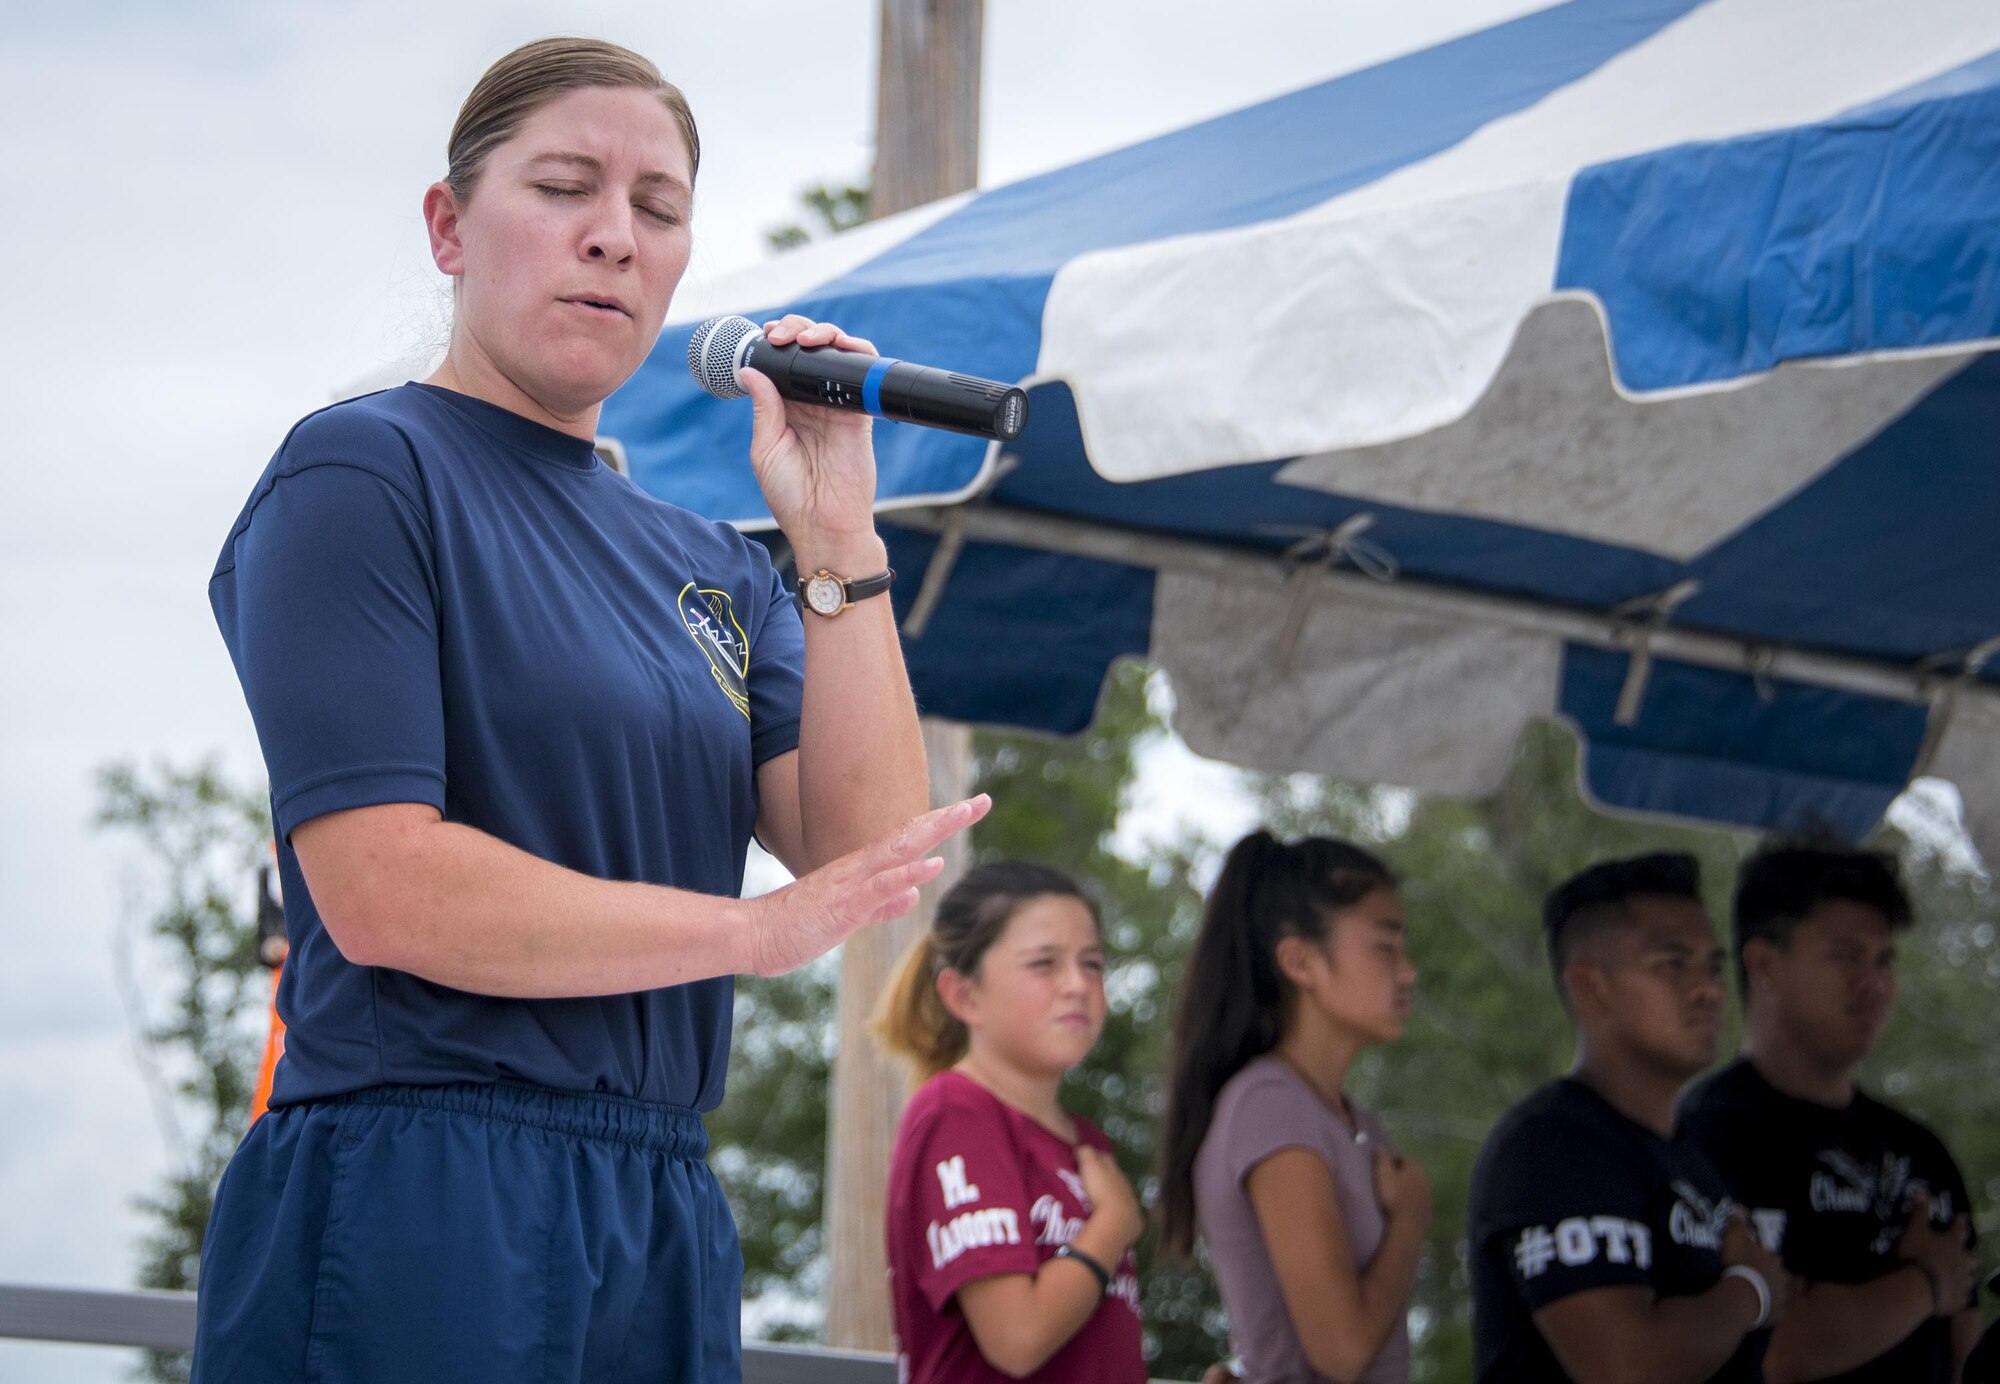 Tech. Sgt. Jennifer Wooten, 16th Electronic Warfare Squadron, sings the National Anthem to kick off the Eglin Connects event at Eglin Air Force Base, Fla., June 2.  The event to help promote resiliency featured information booths, sporting events and a car show.  (U.S. Air Force photo/Samuel King Jr.)